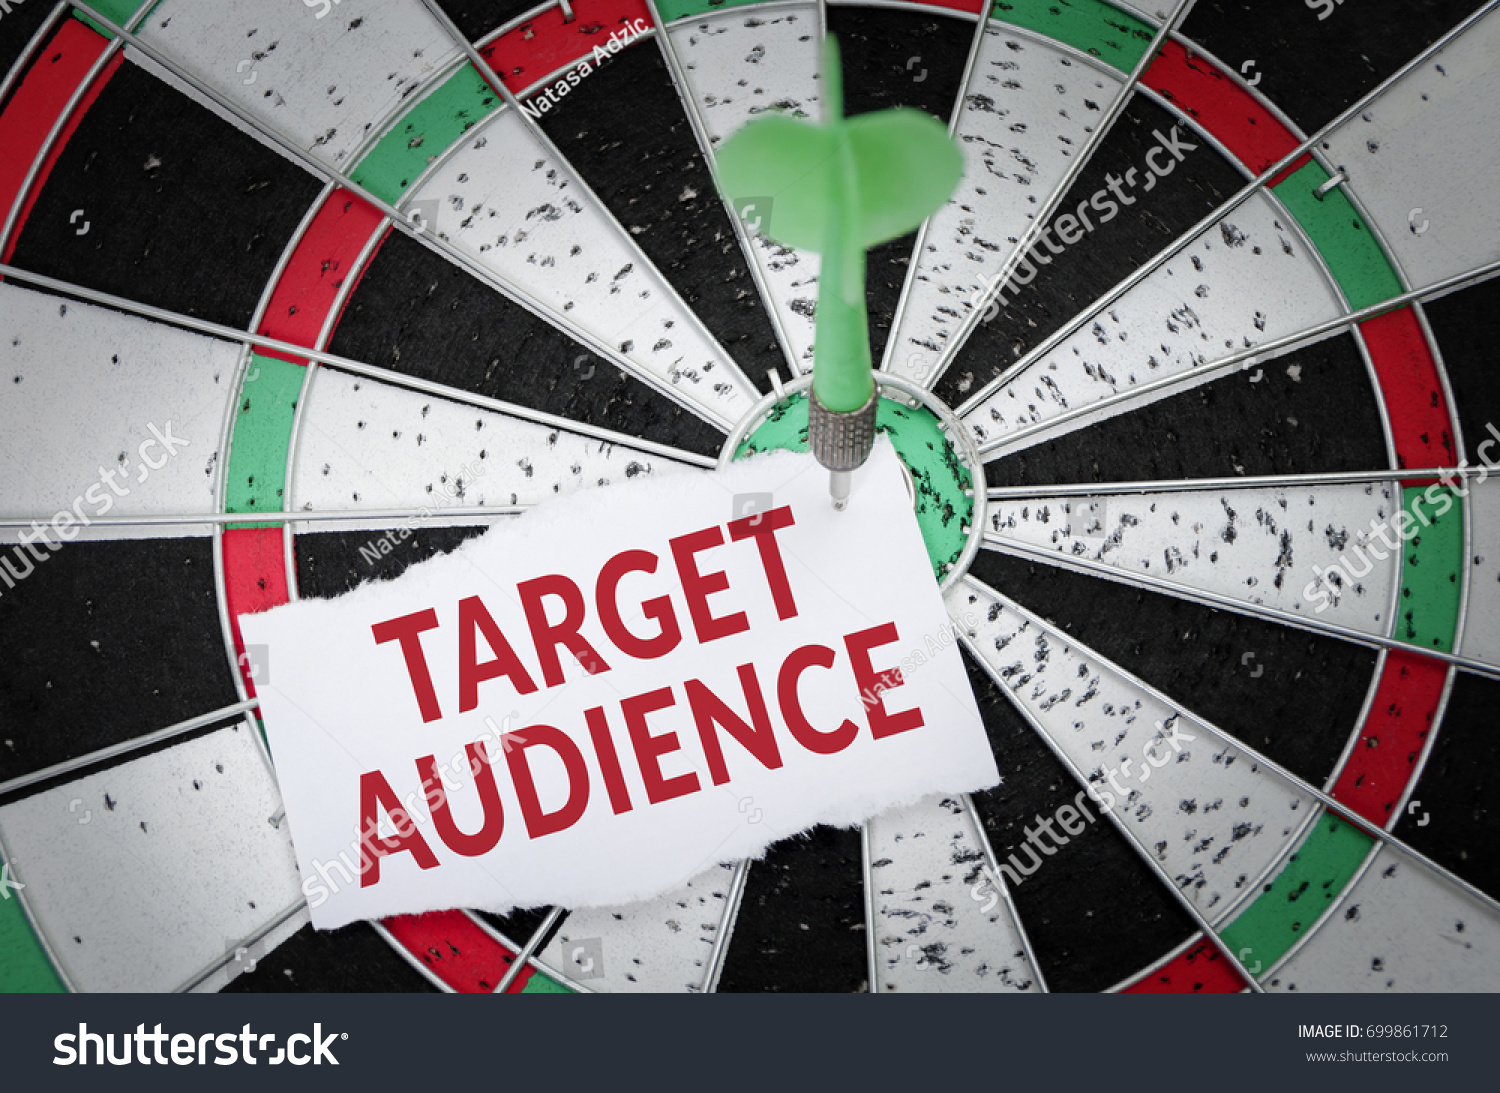 Target audience note on notepaper with dart arrow and dart board. Marketing, advertisement, business concept. #699861712